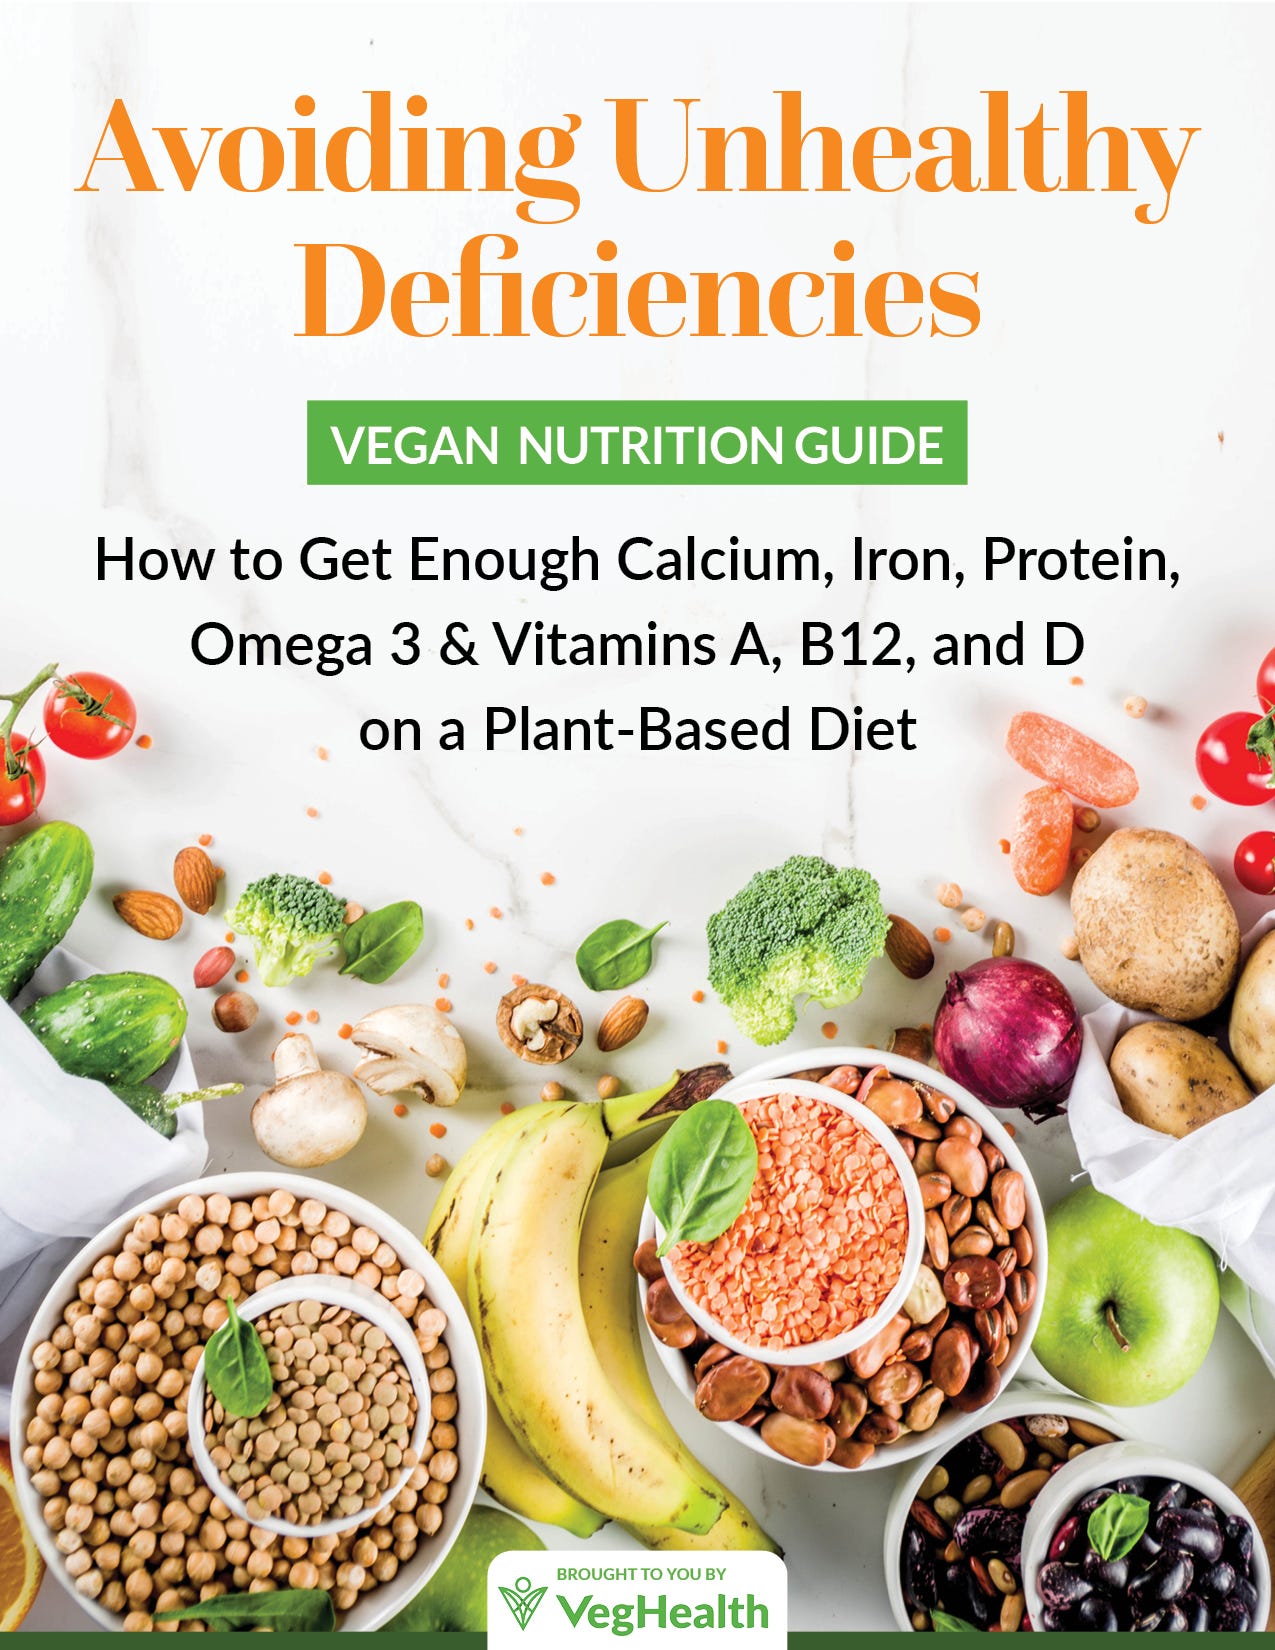 Vegan Nutrition Guide--today's gift